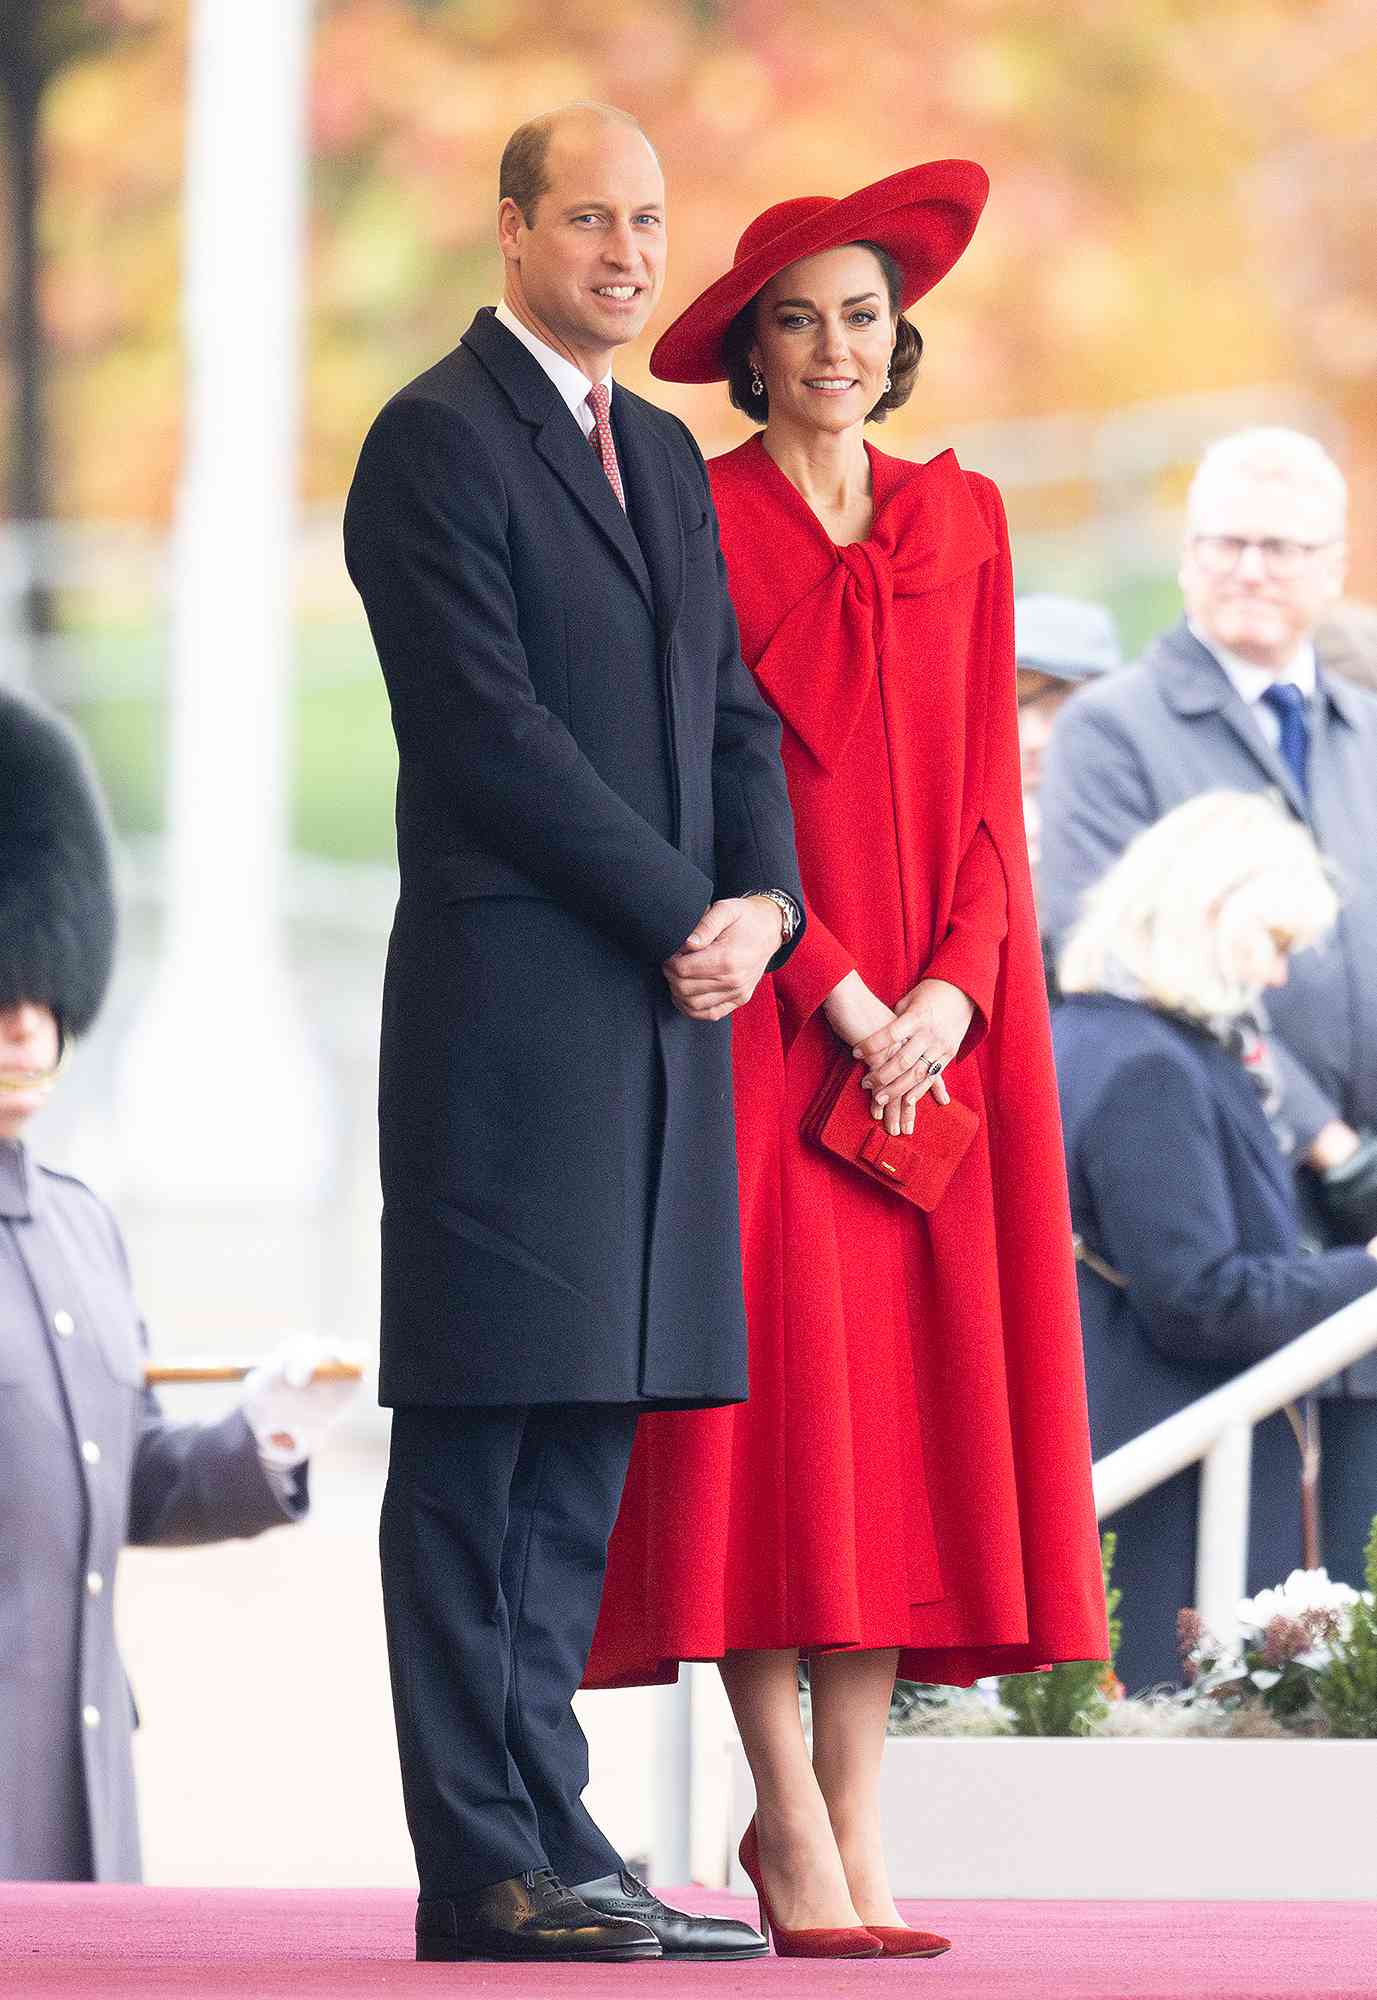 Prince William, Prince of Wales and Catherine, Princess of Wales attend a ceremonial welcome for The President and the First Lady of the Republic of Korea at Horse Guards Parade on November 21, 2023 in London, England. King Charles is hosting Korean President Yoon Suk Yeol and his wife Kim Keon Hee on a state visit from November 21-23. It is the second incoming state visit hosted by the King during his reign.